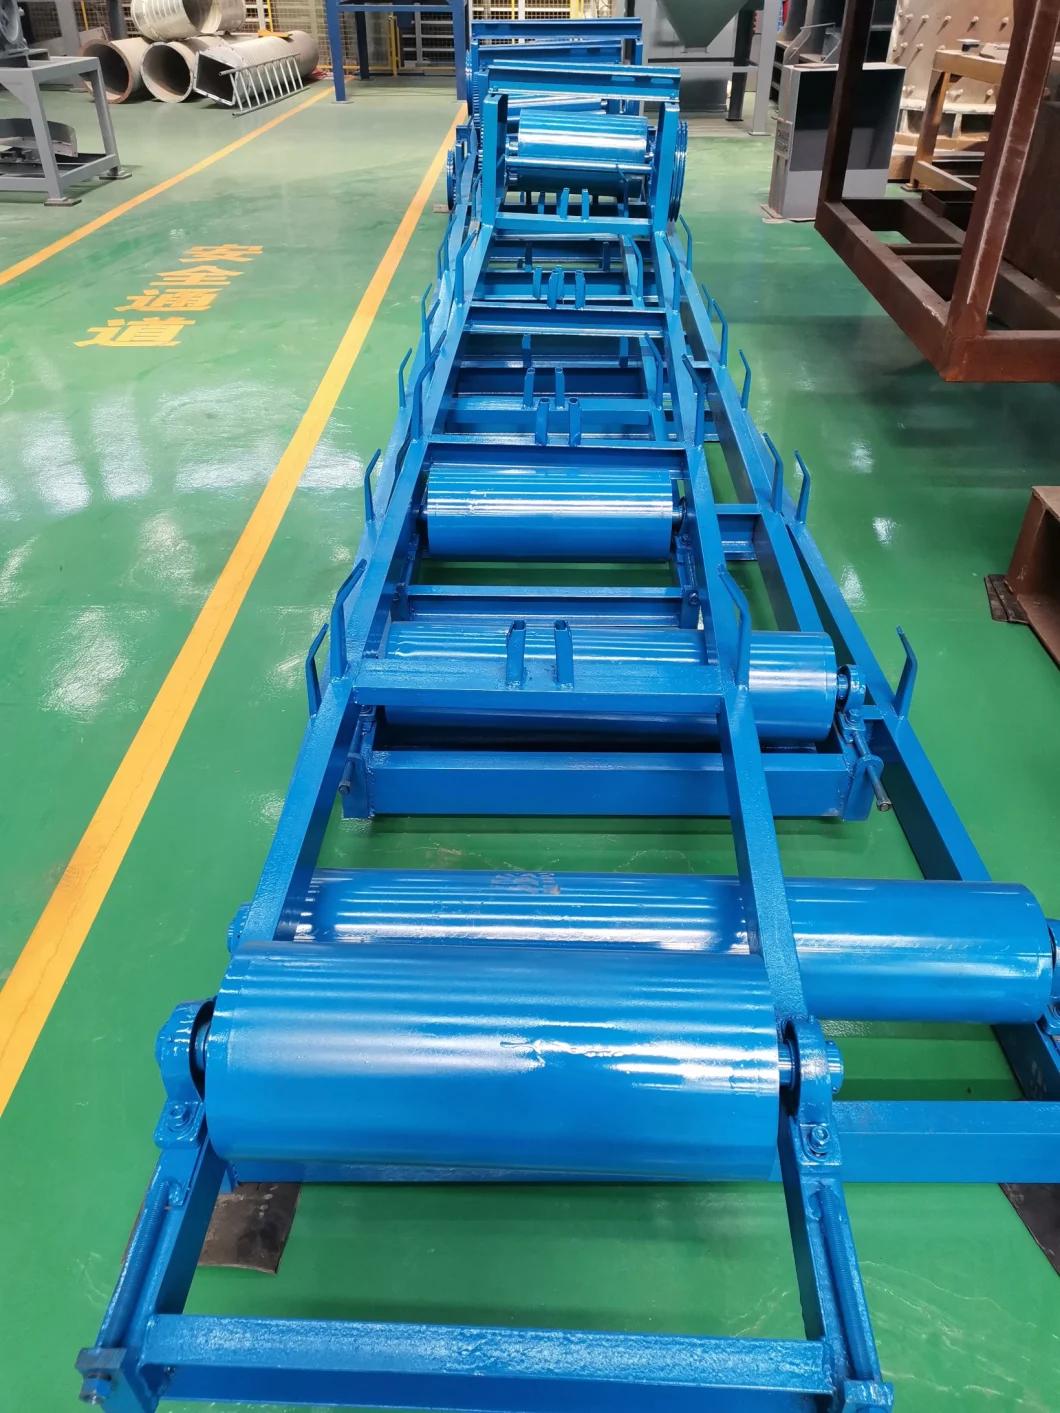 Rubber Material Inclined Belt Conveyor / Belt Conveyor Popular in Abroad for Mining, Stone, Clinker, Sand